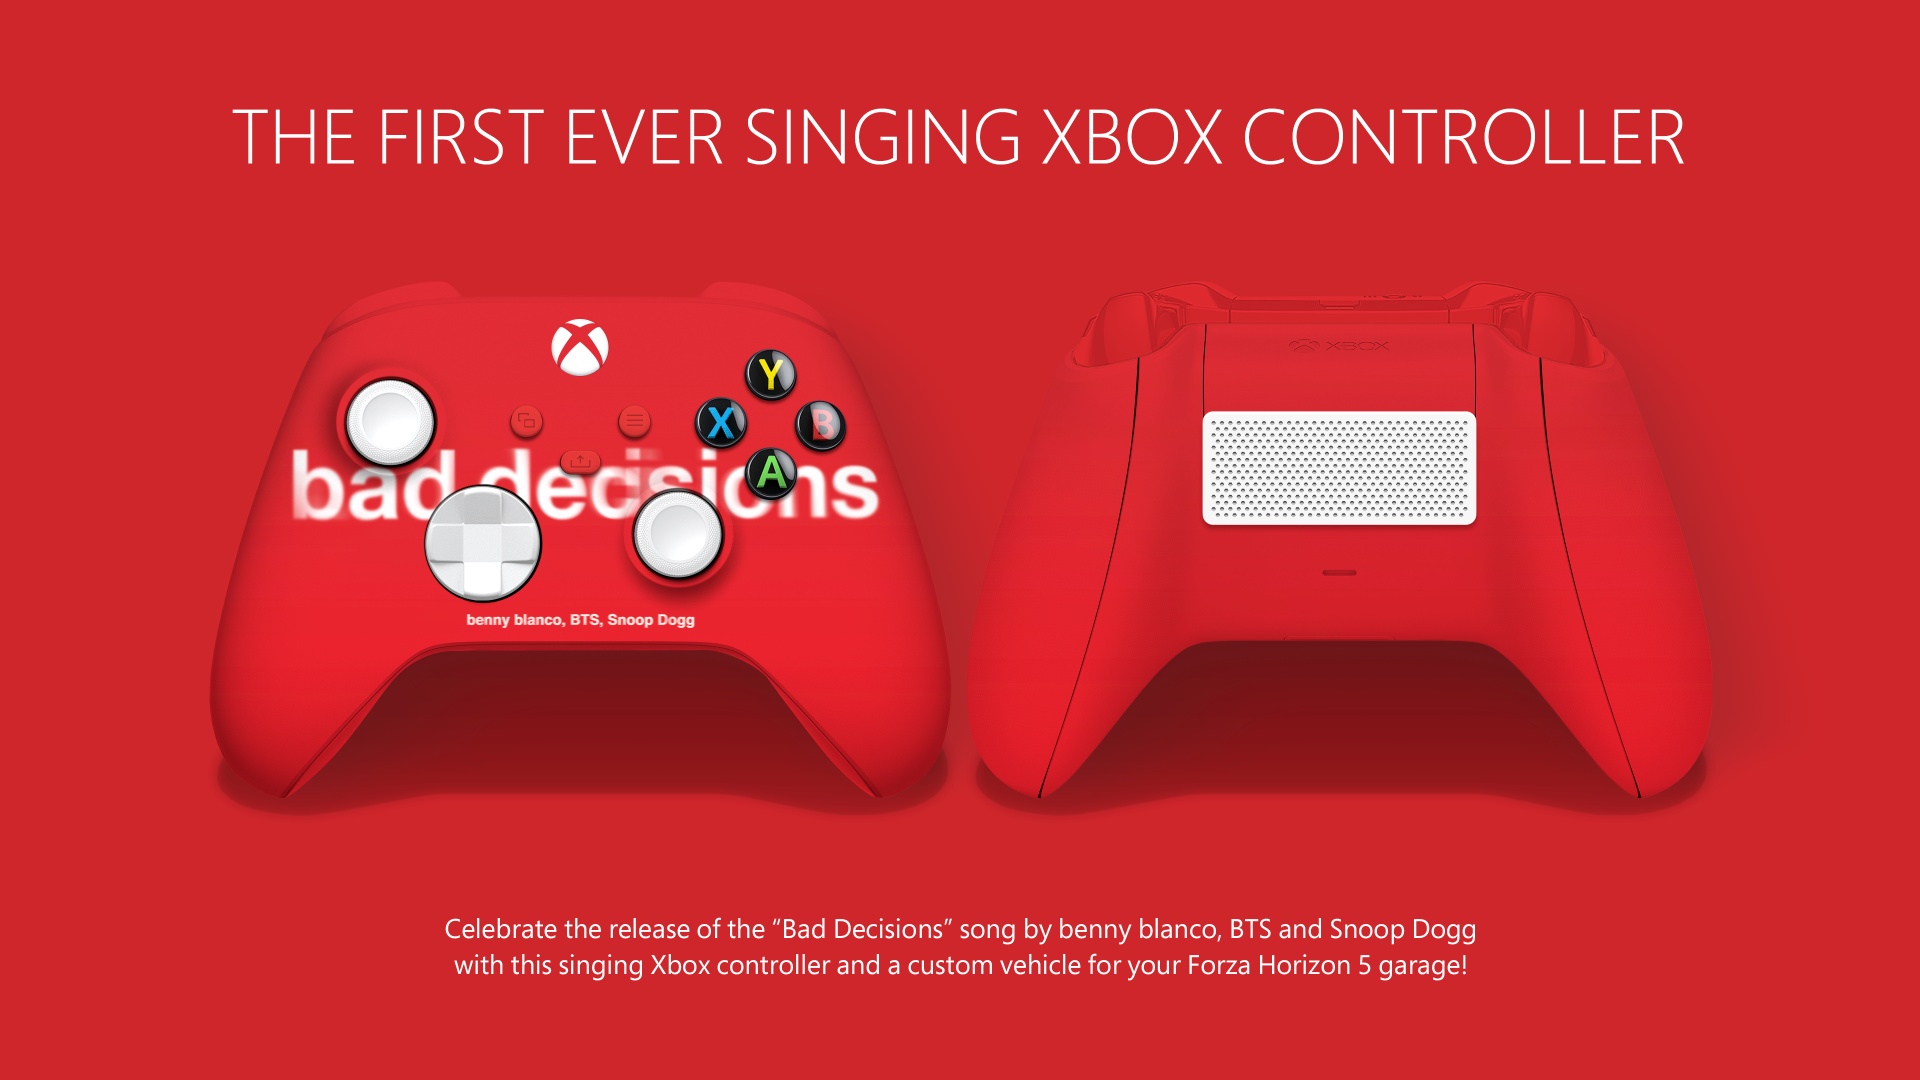 "Bad Decisions" Hero Image featuring photo of exclusive red Xbox controller.